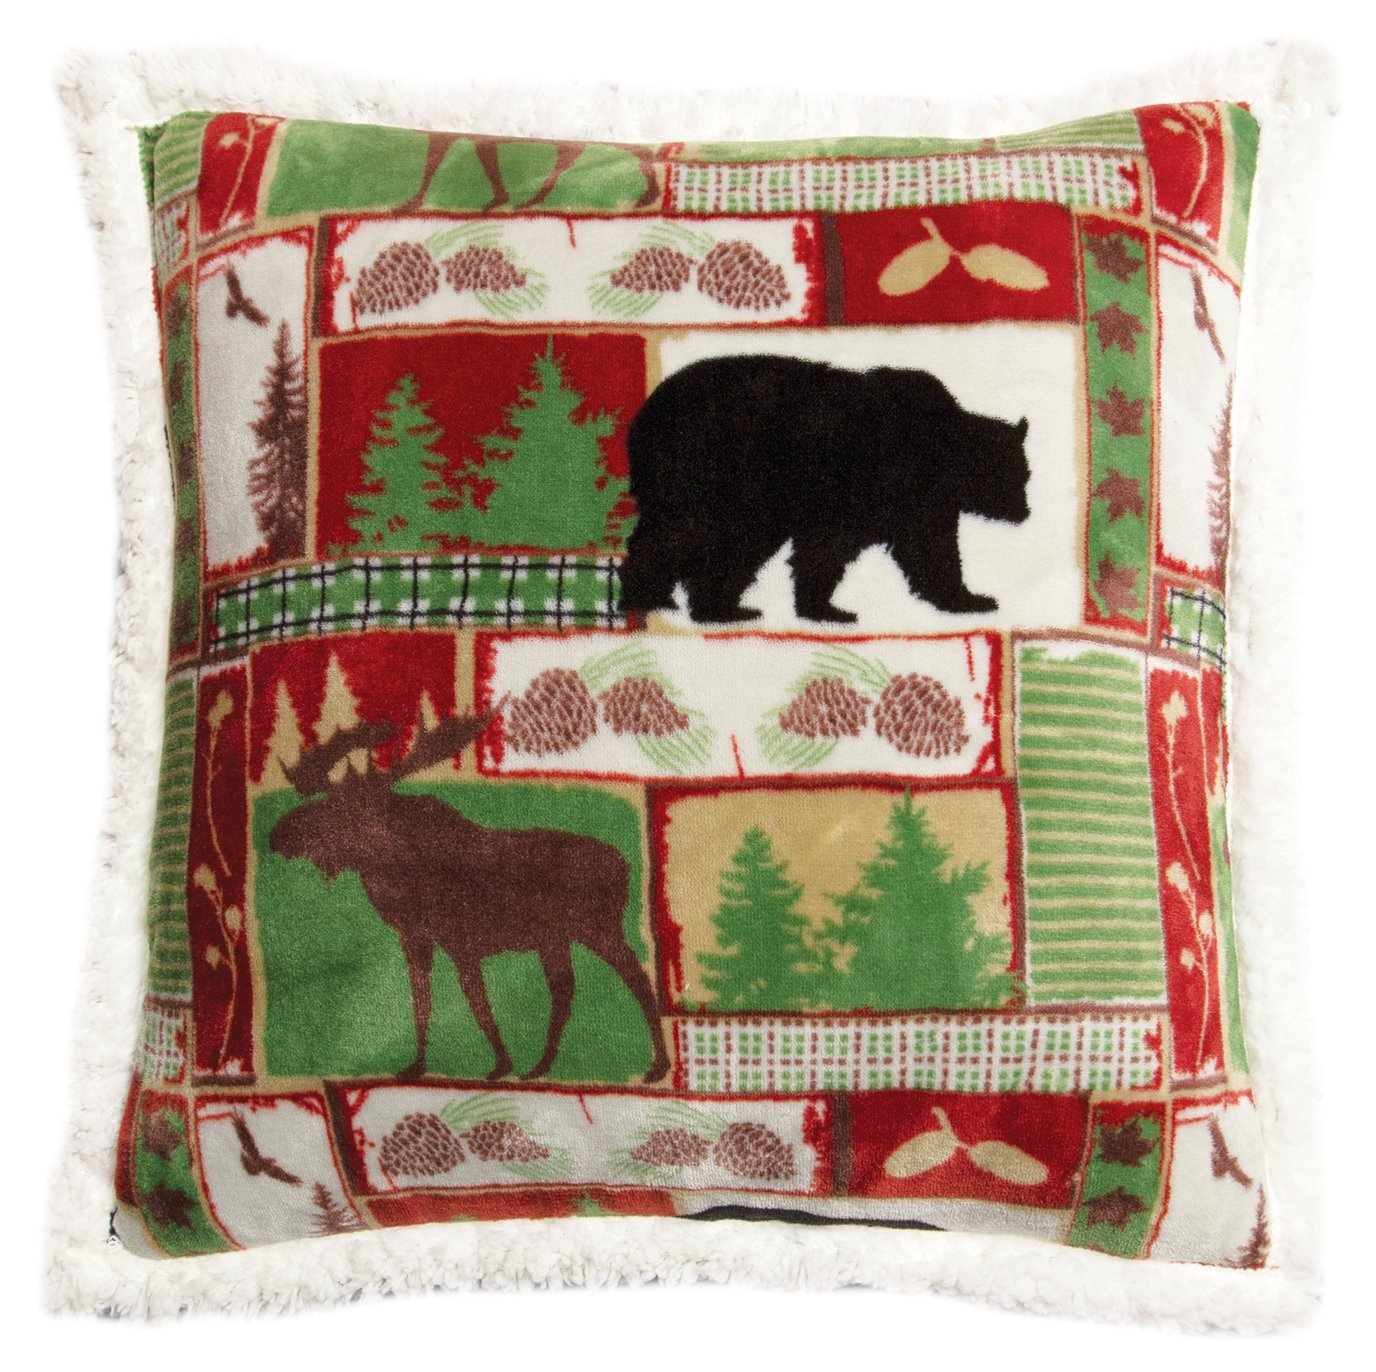 Vintage Holiday Rustic Cabin Sherpa Throw Pillow (Insert Included) 18" x 18"